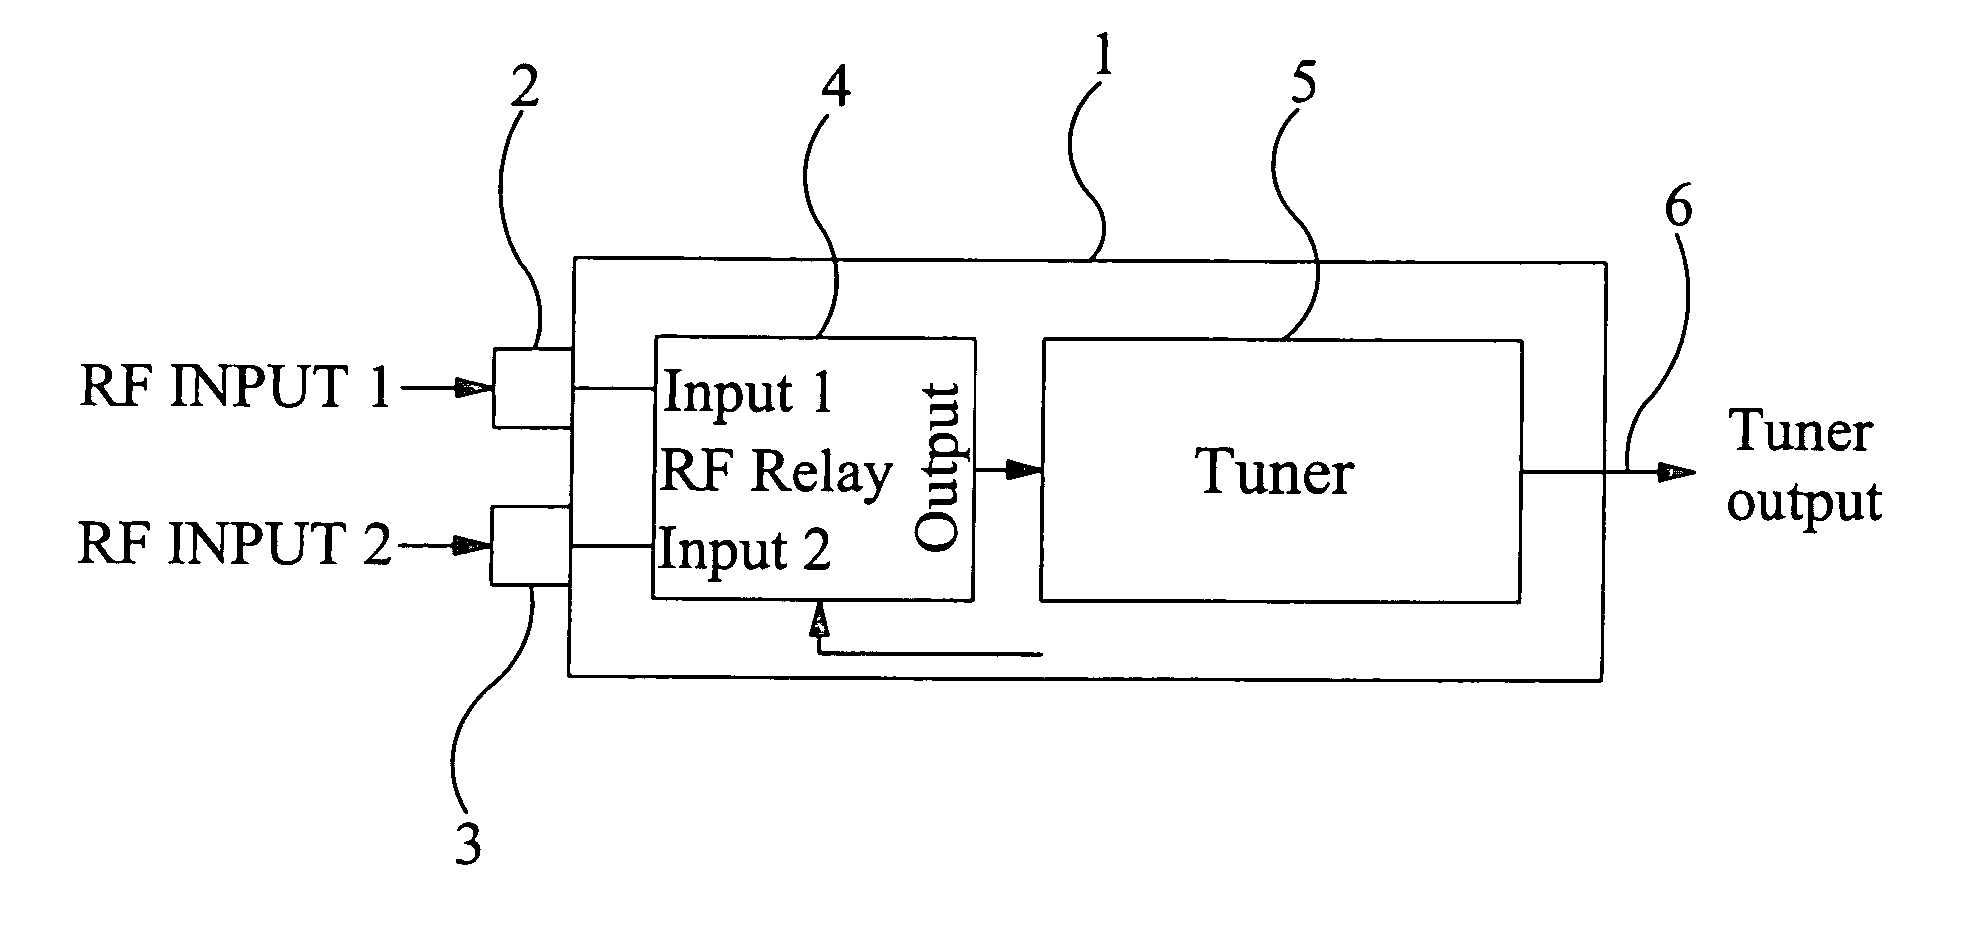 Radio frequency tuner